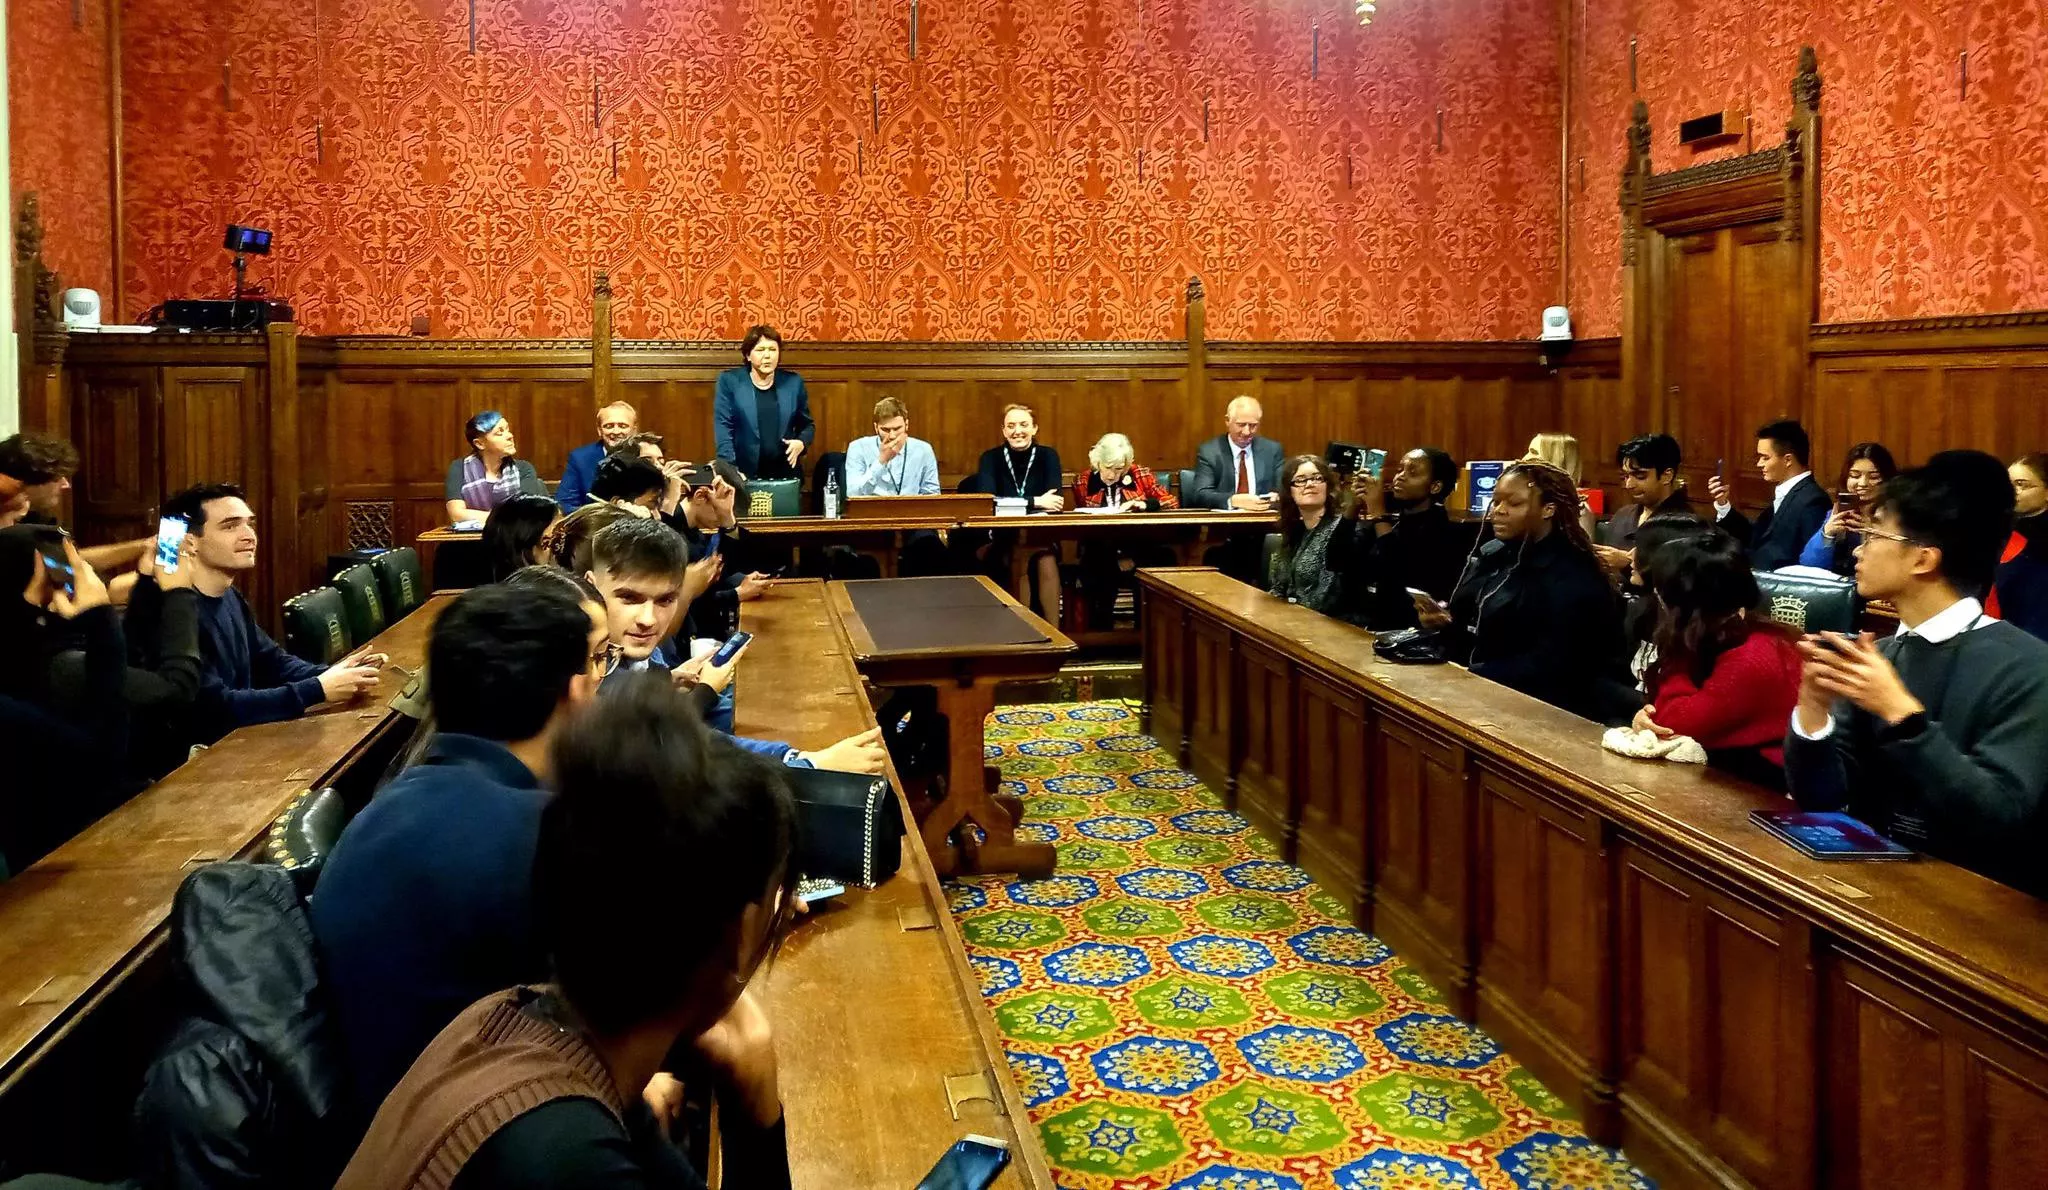 A question and answer session took place in one of the parliamentary committee rooms. Picture: SPE